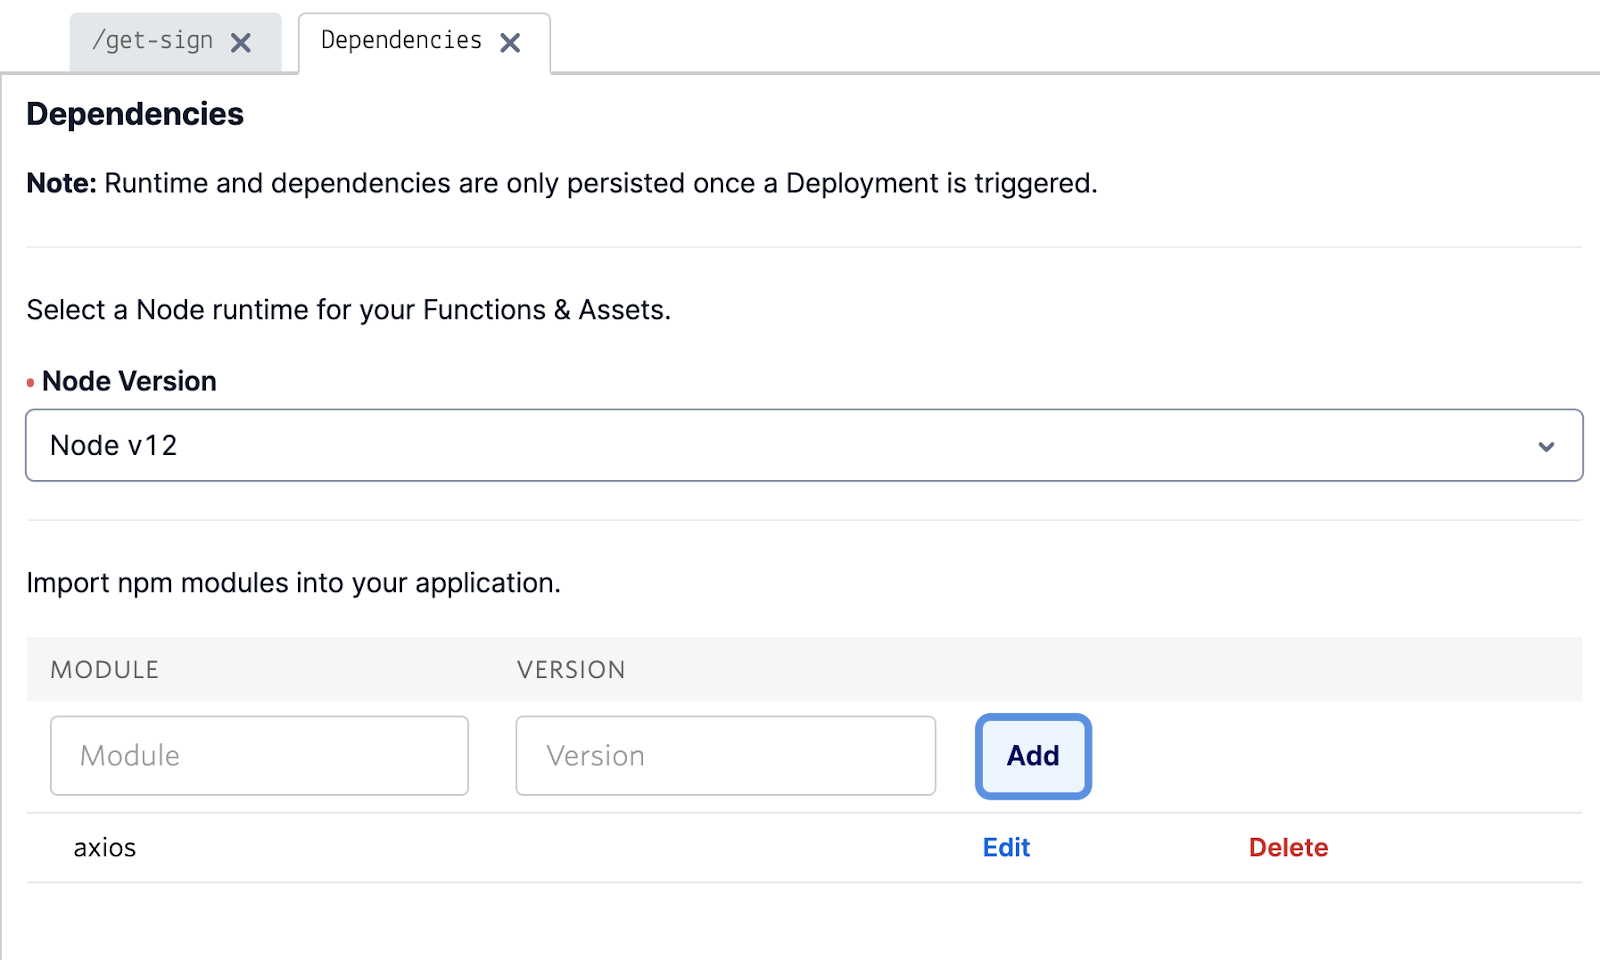 The dependencies section of Twilio Functions where you need to input axios as a dependency